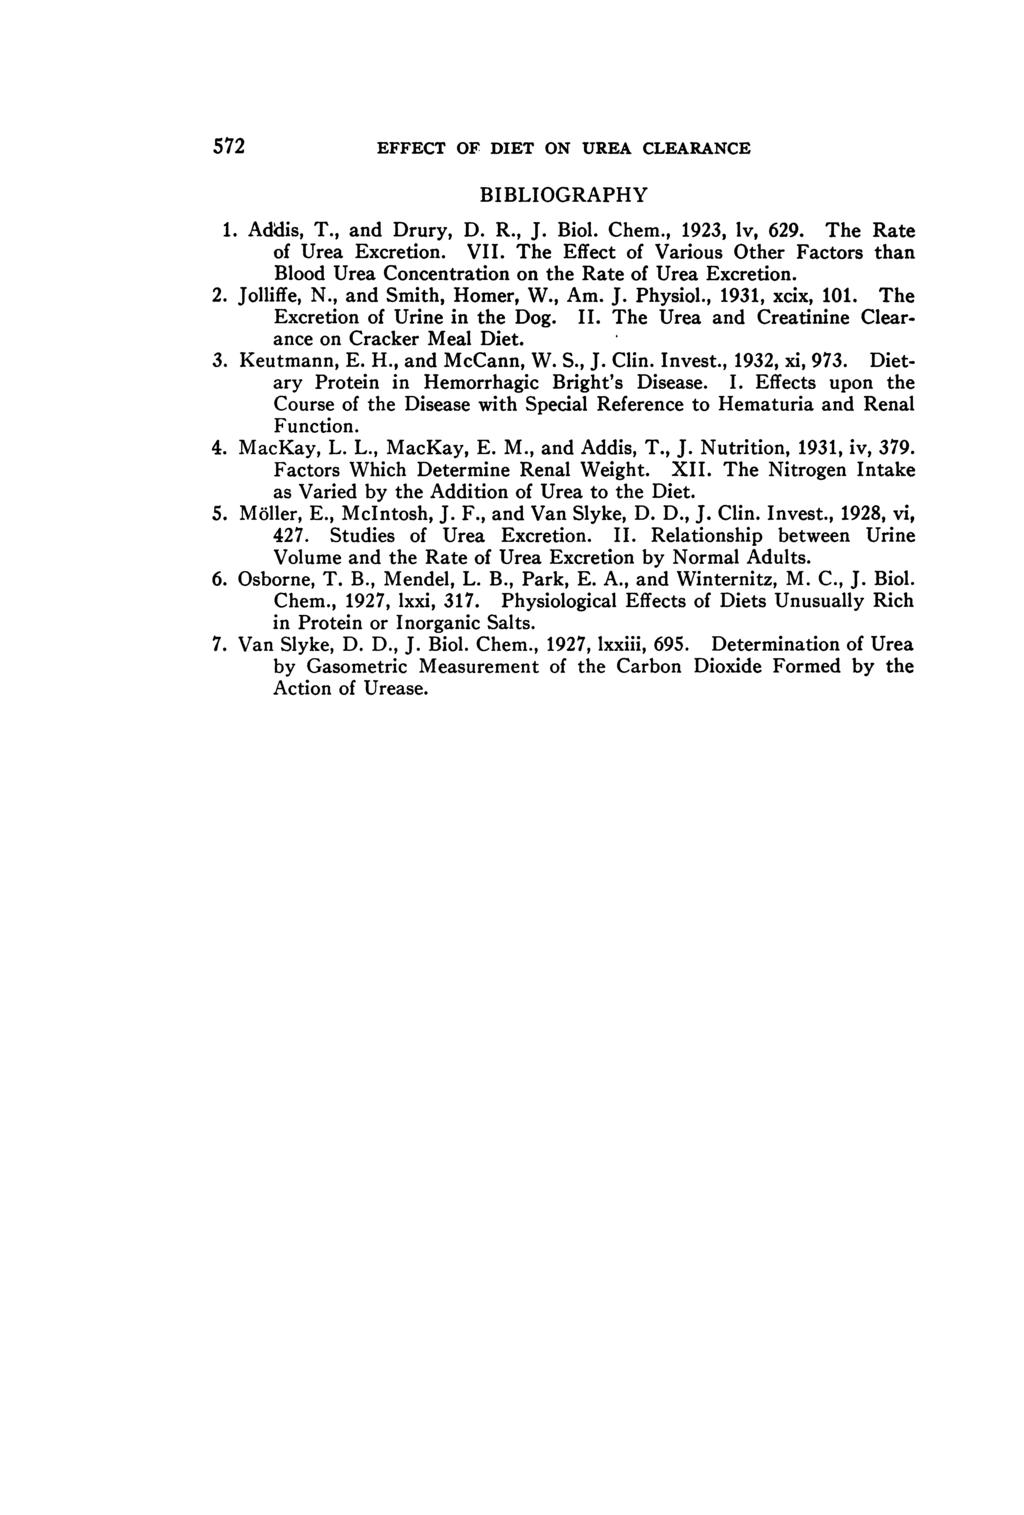 572 EFFECT OF DIET ON UREA CLEARANCE BIBLIOGRAPHY 1. Addis, T., and Drury, D. R., J. Biol. Chem., 1923, lv, 629. The Rate of Urea Excretion. VII.